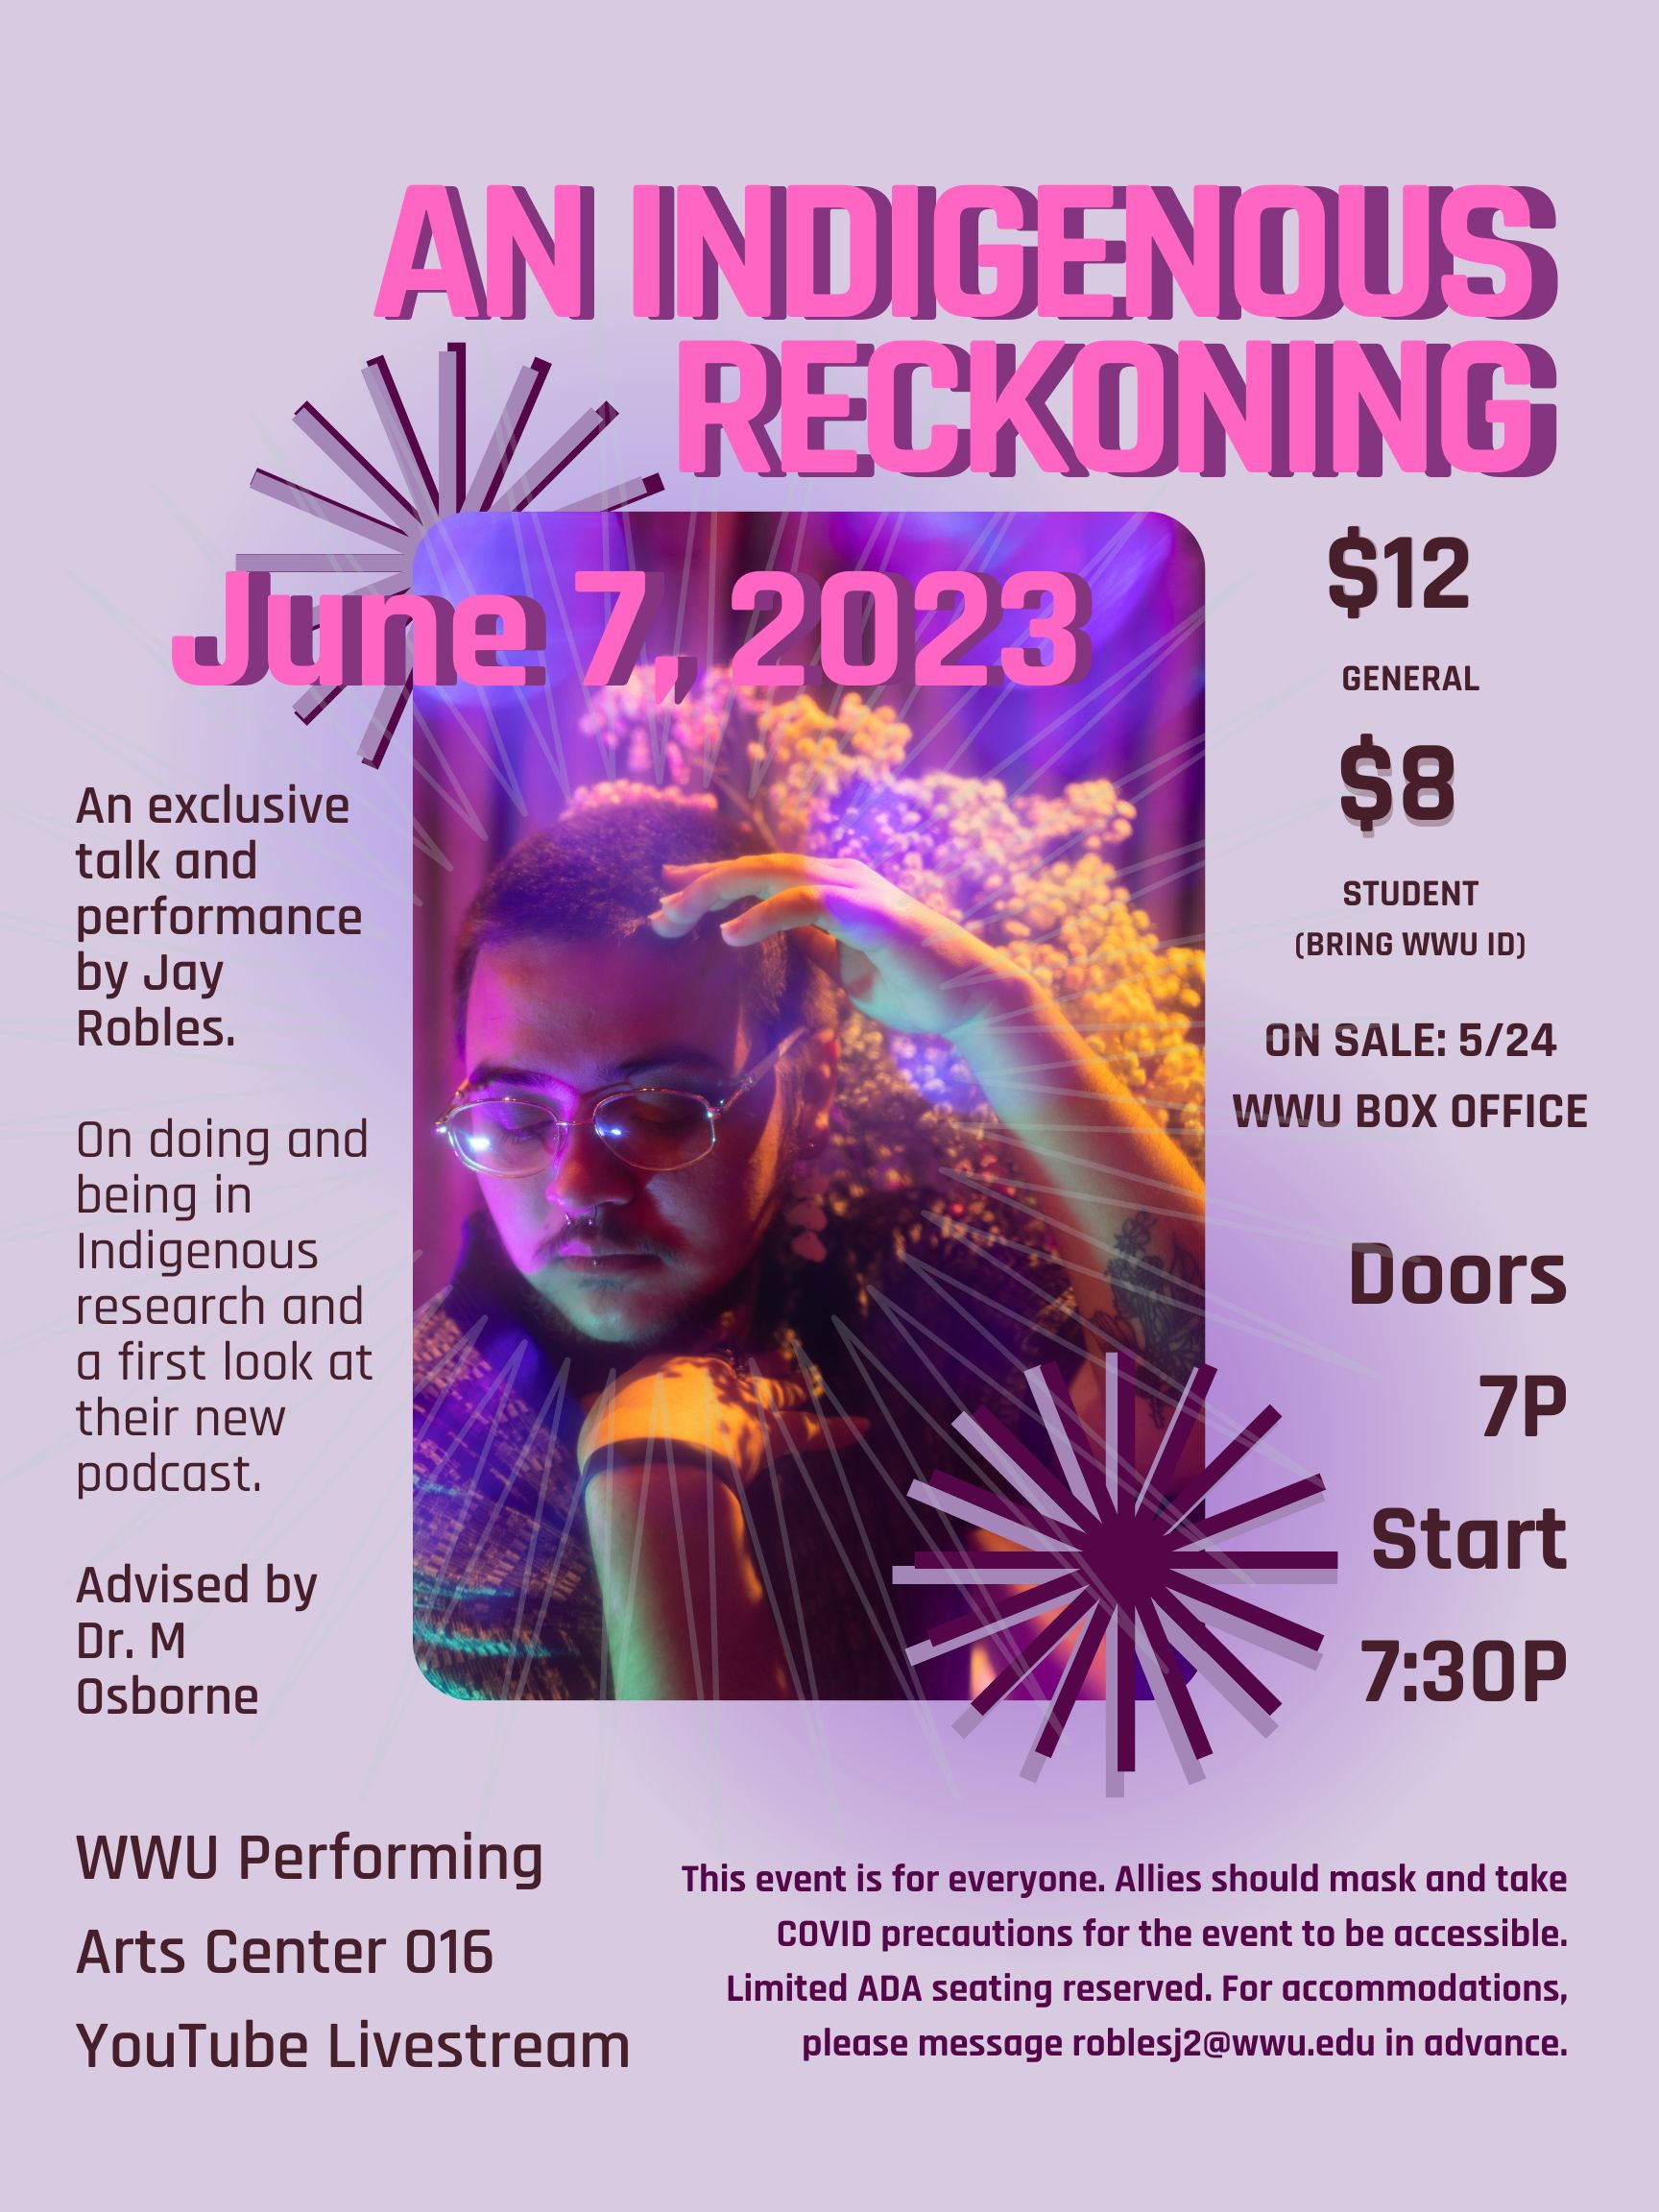 Title reads "An Indigenous Reckoning". "June 7, 2023" is overlayed on a photo of Jay Robles. "$12 General, $8 Student (Bring WWU ID)" and "On sale 5/24 (May 24) WWU Box Office". Subtitle reads "An exclusive talk and performance by Jay Robles", "On doing and being in Indigenous research and a first look at their new podcast" and "Advised by Dr. M Osborne". At the bottom, text reads to the left "WWU Performing Arts Center 016". To the bottom right, text reads "For accommodations, email roblesj2@wwu.edu."